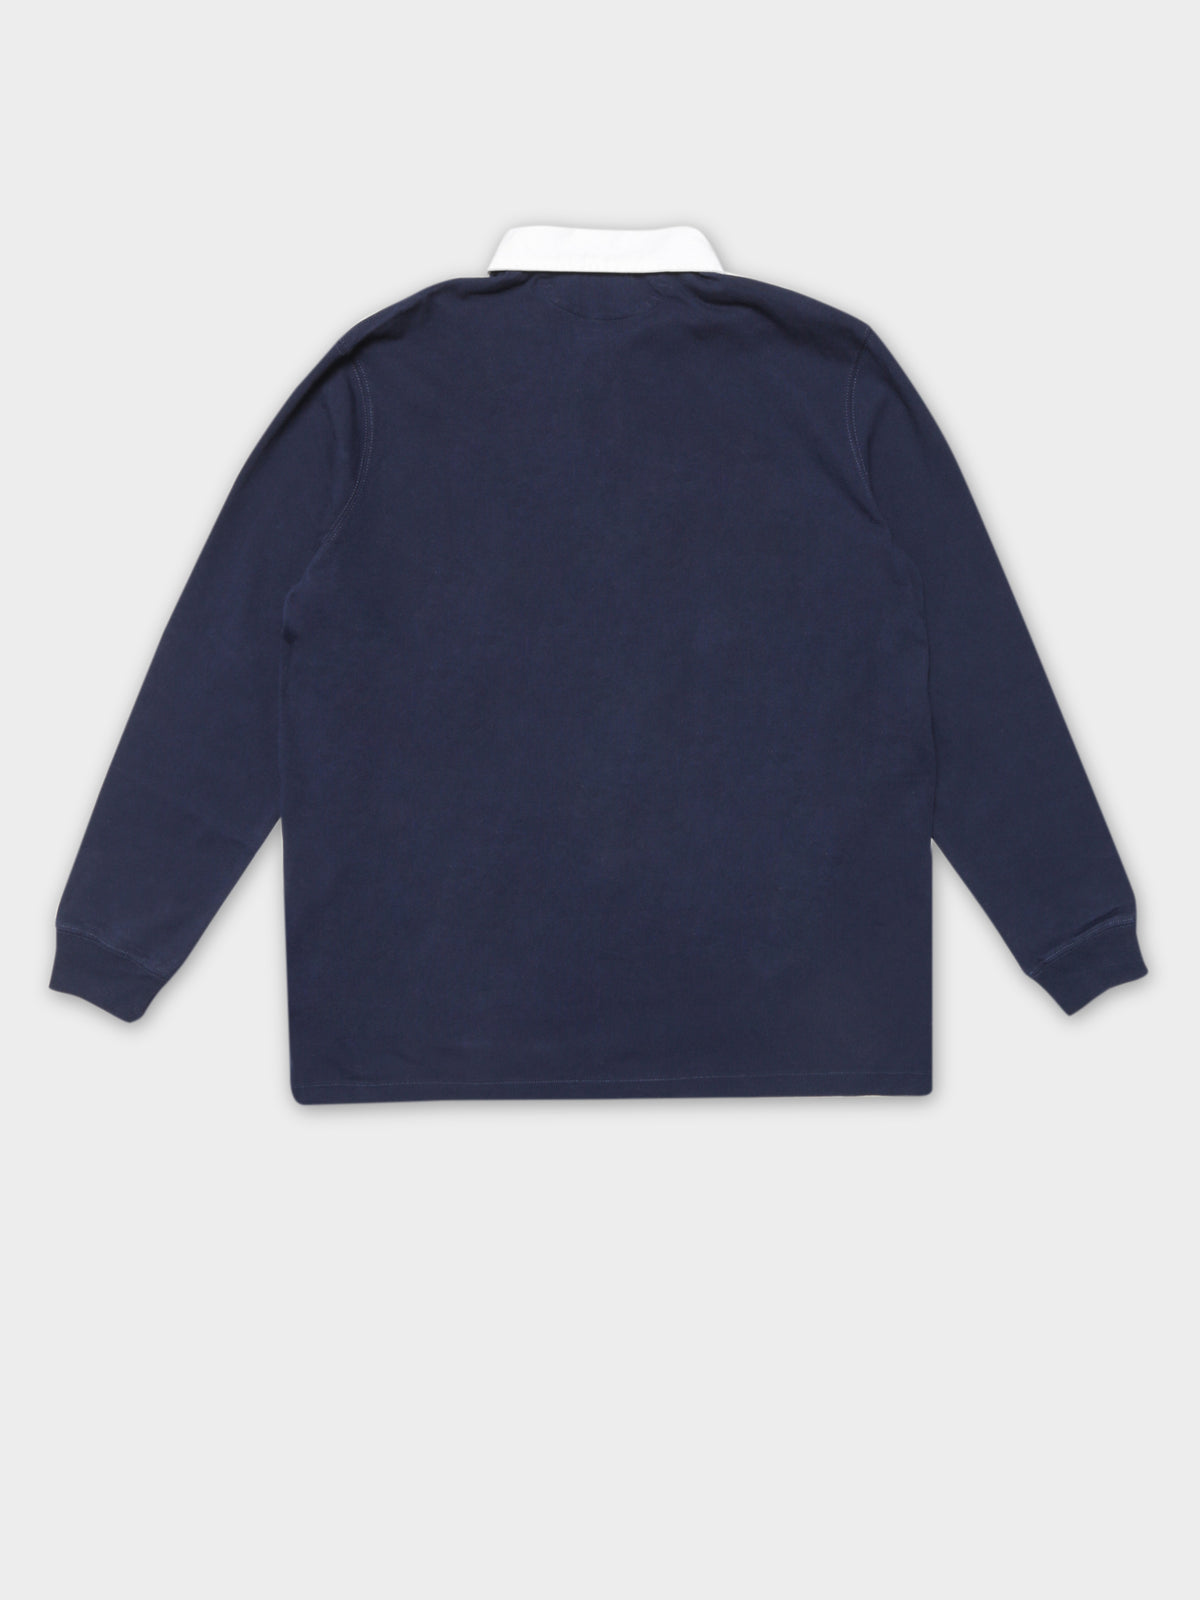 Rugby Shirt in Navy